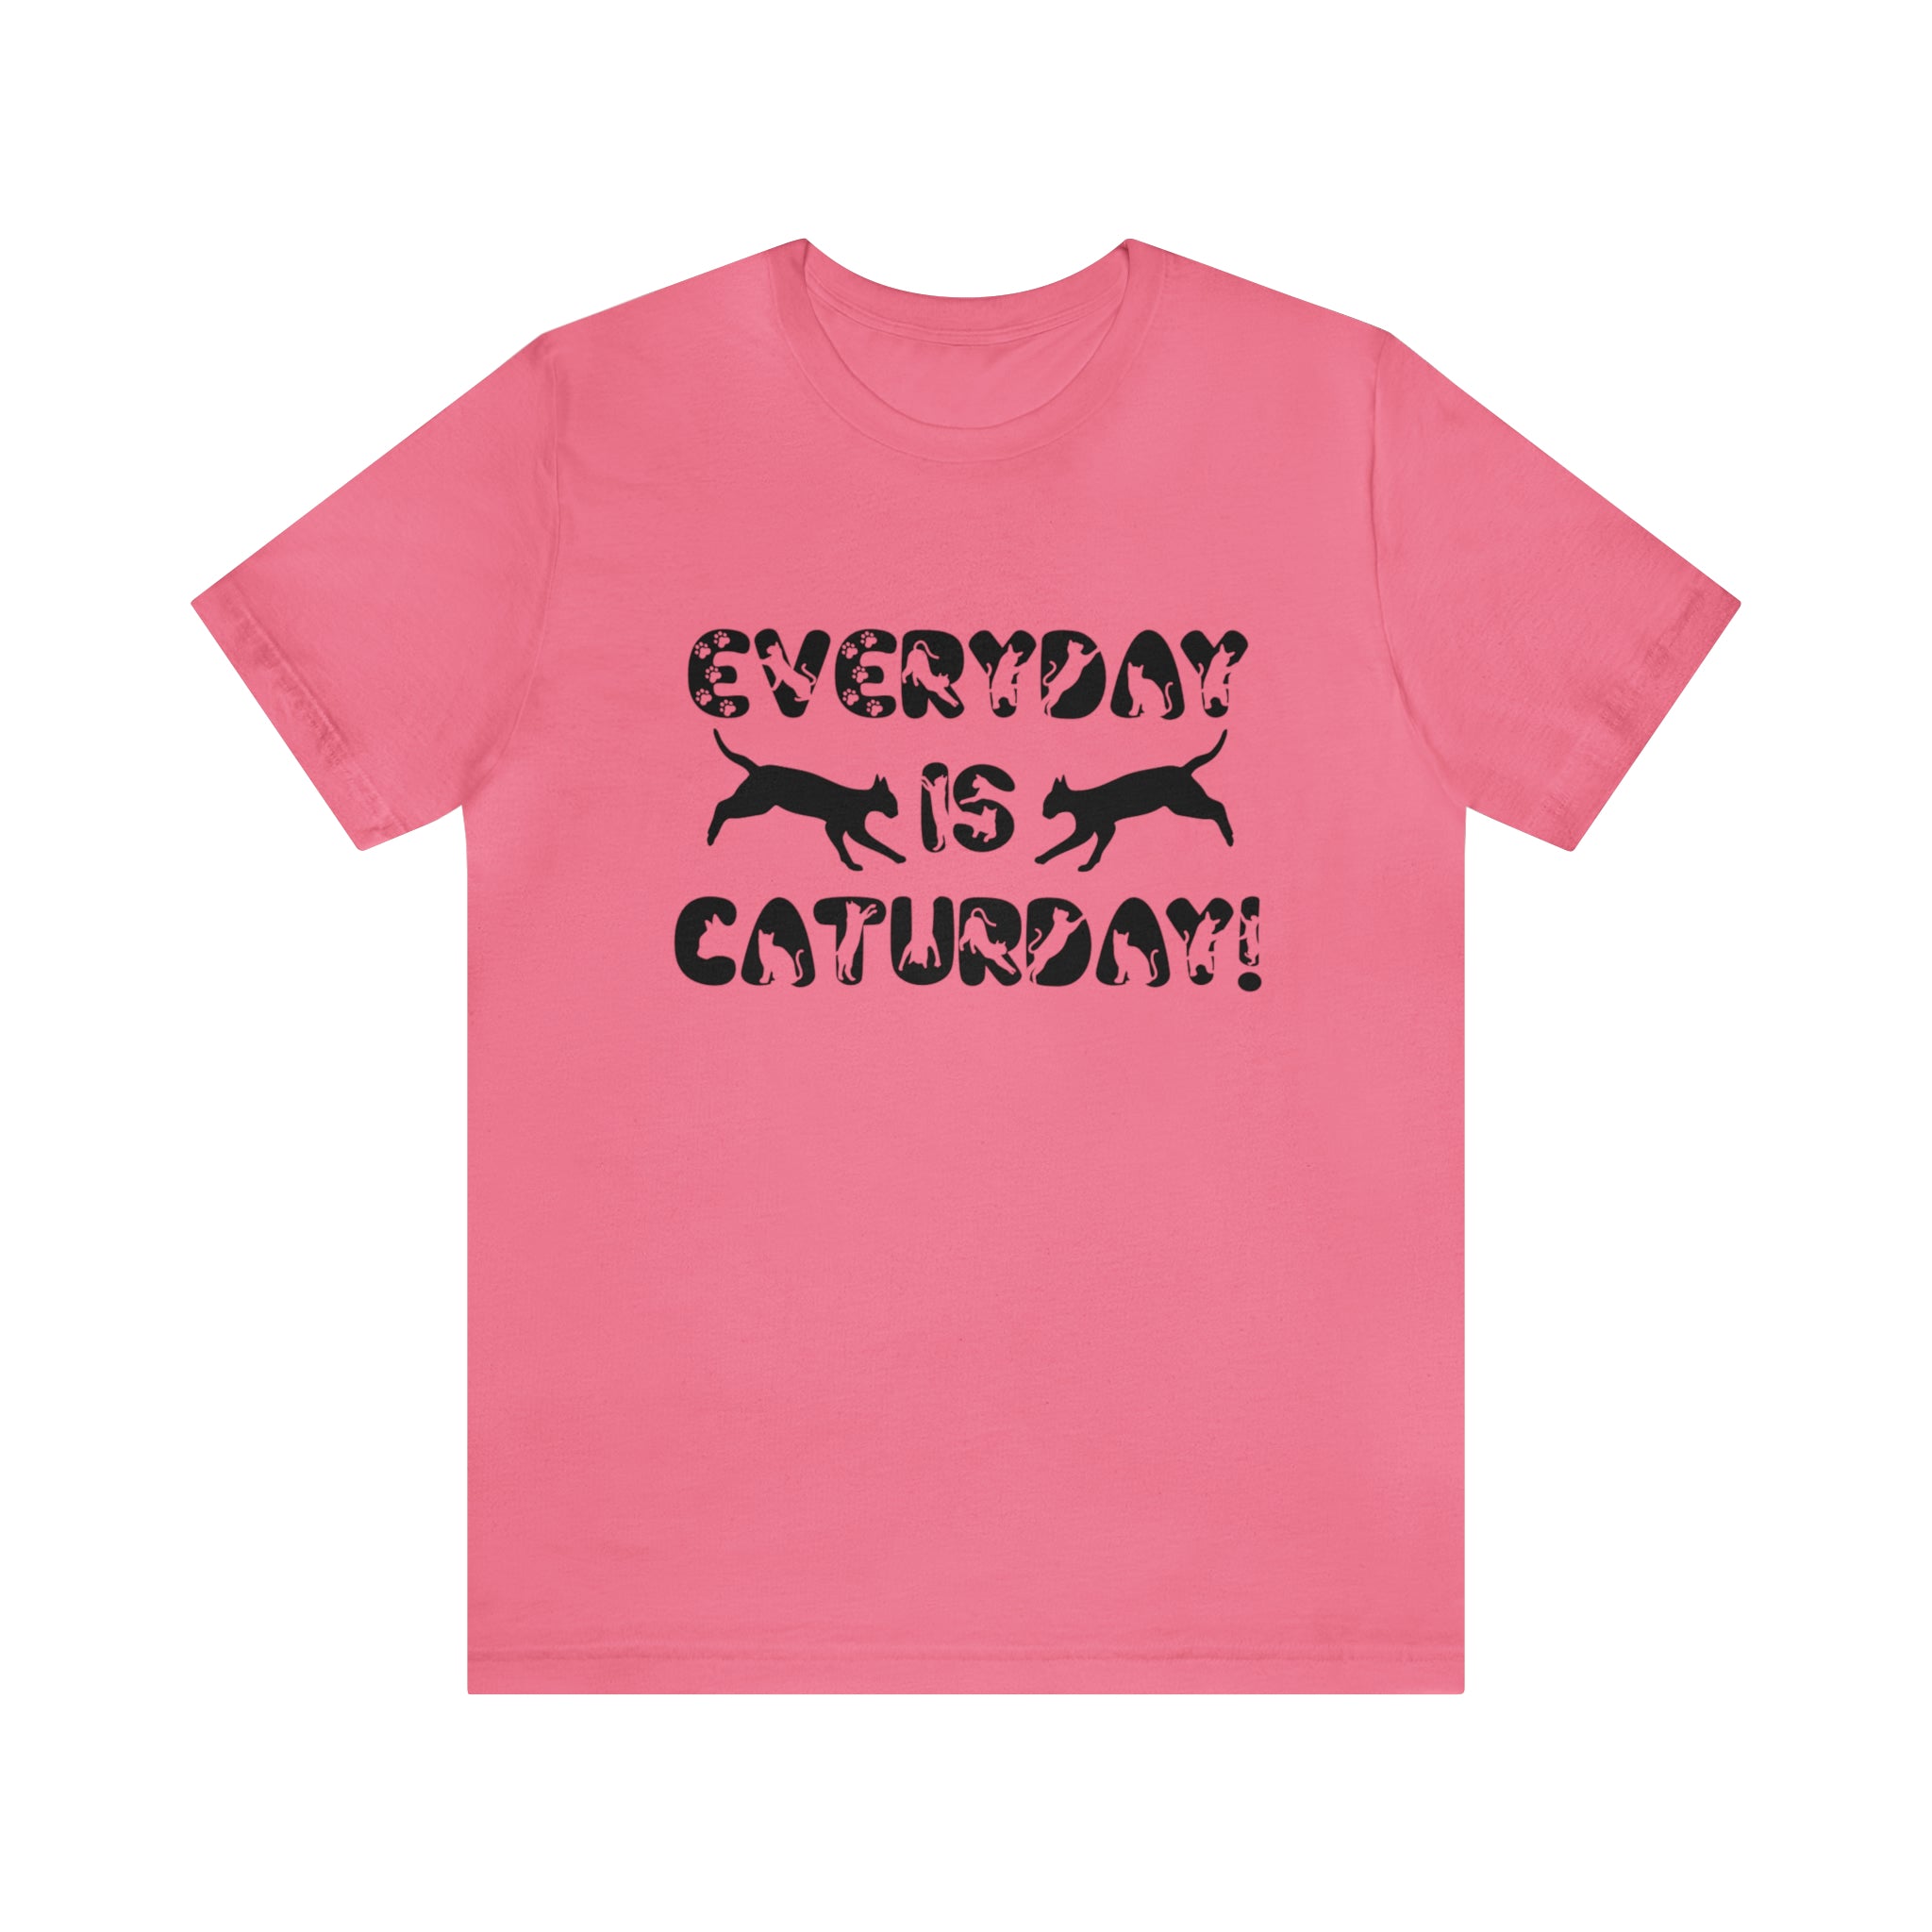 Everyday is caturday t-shirt pink